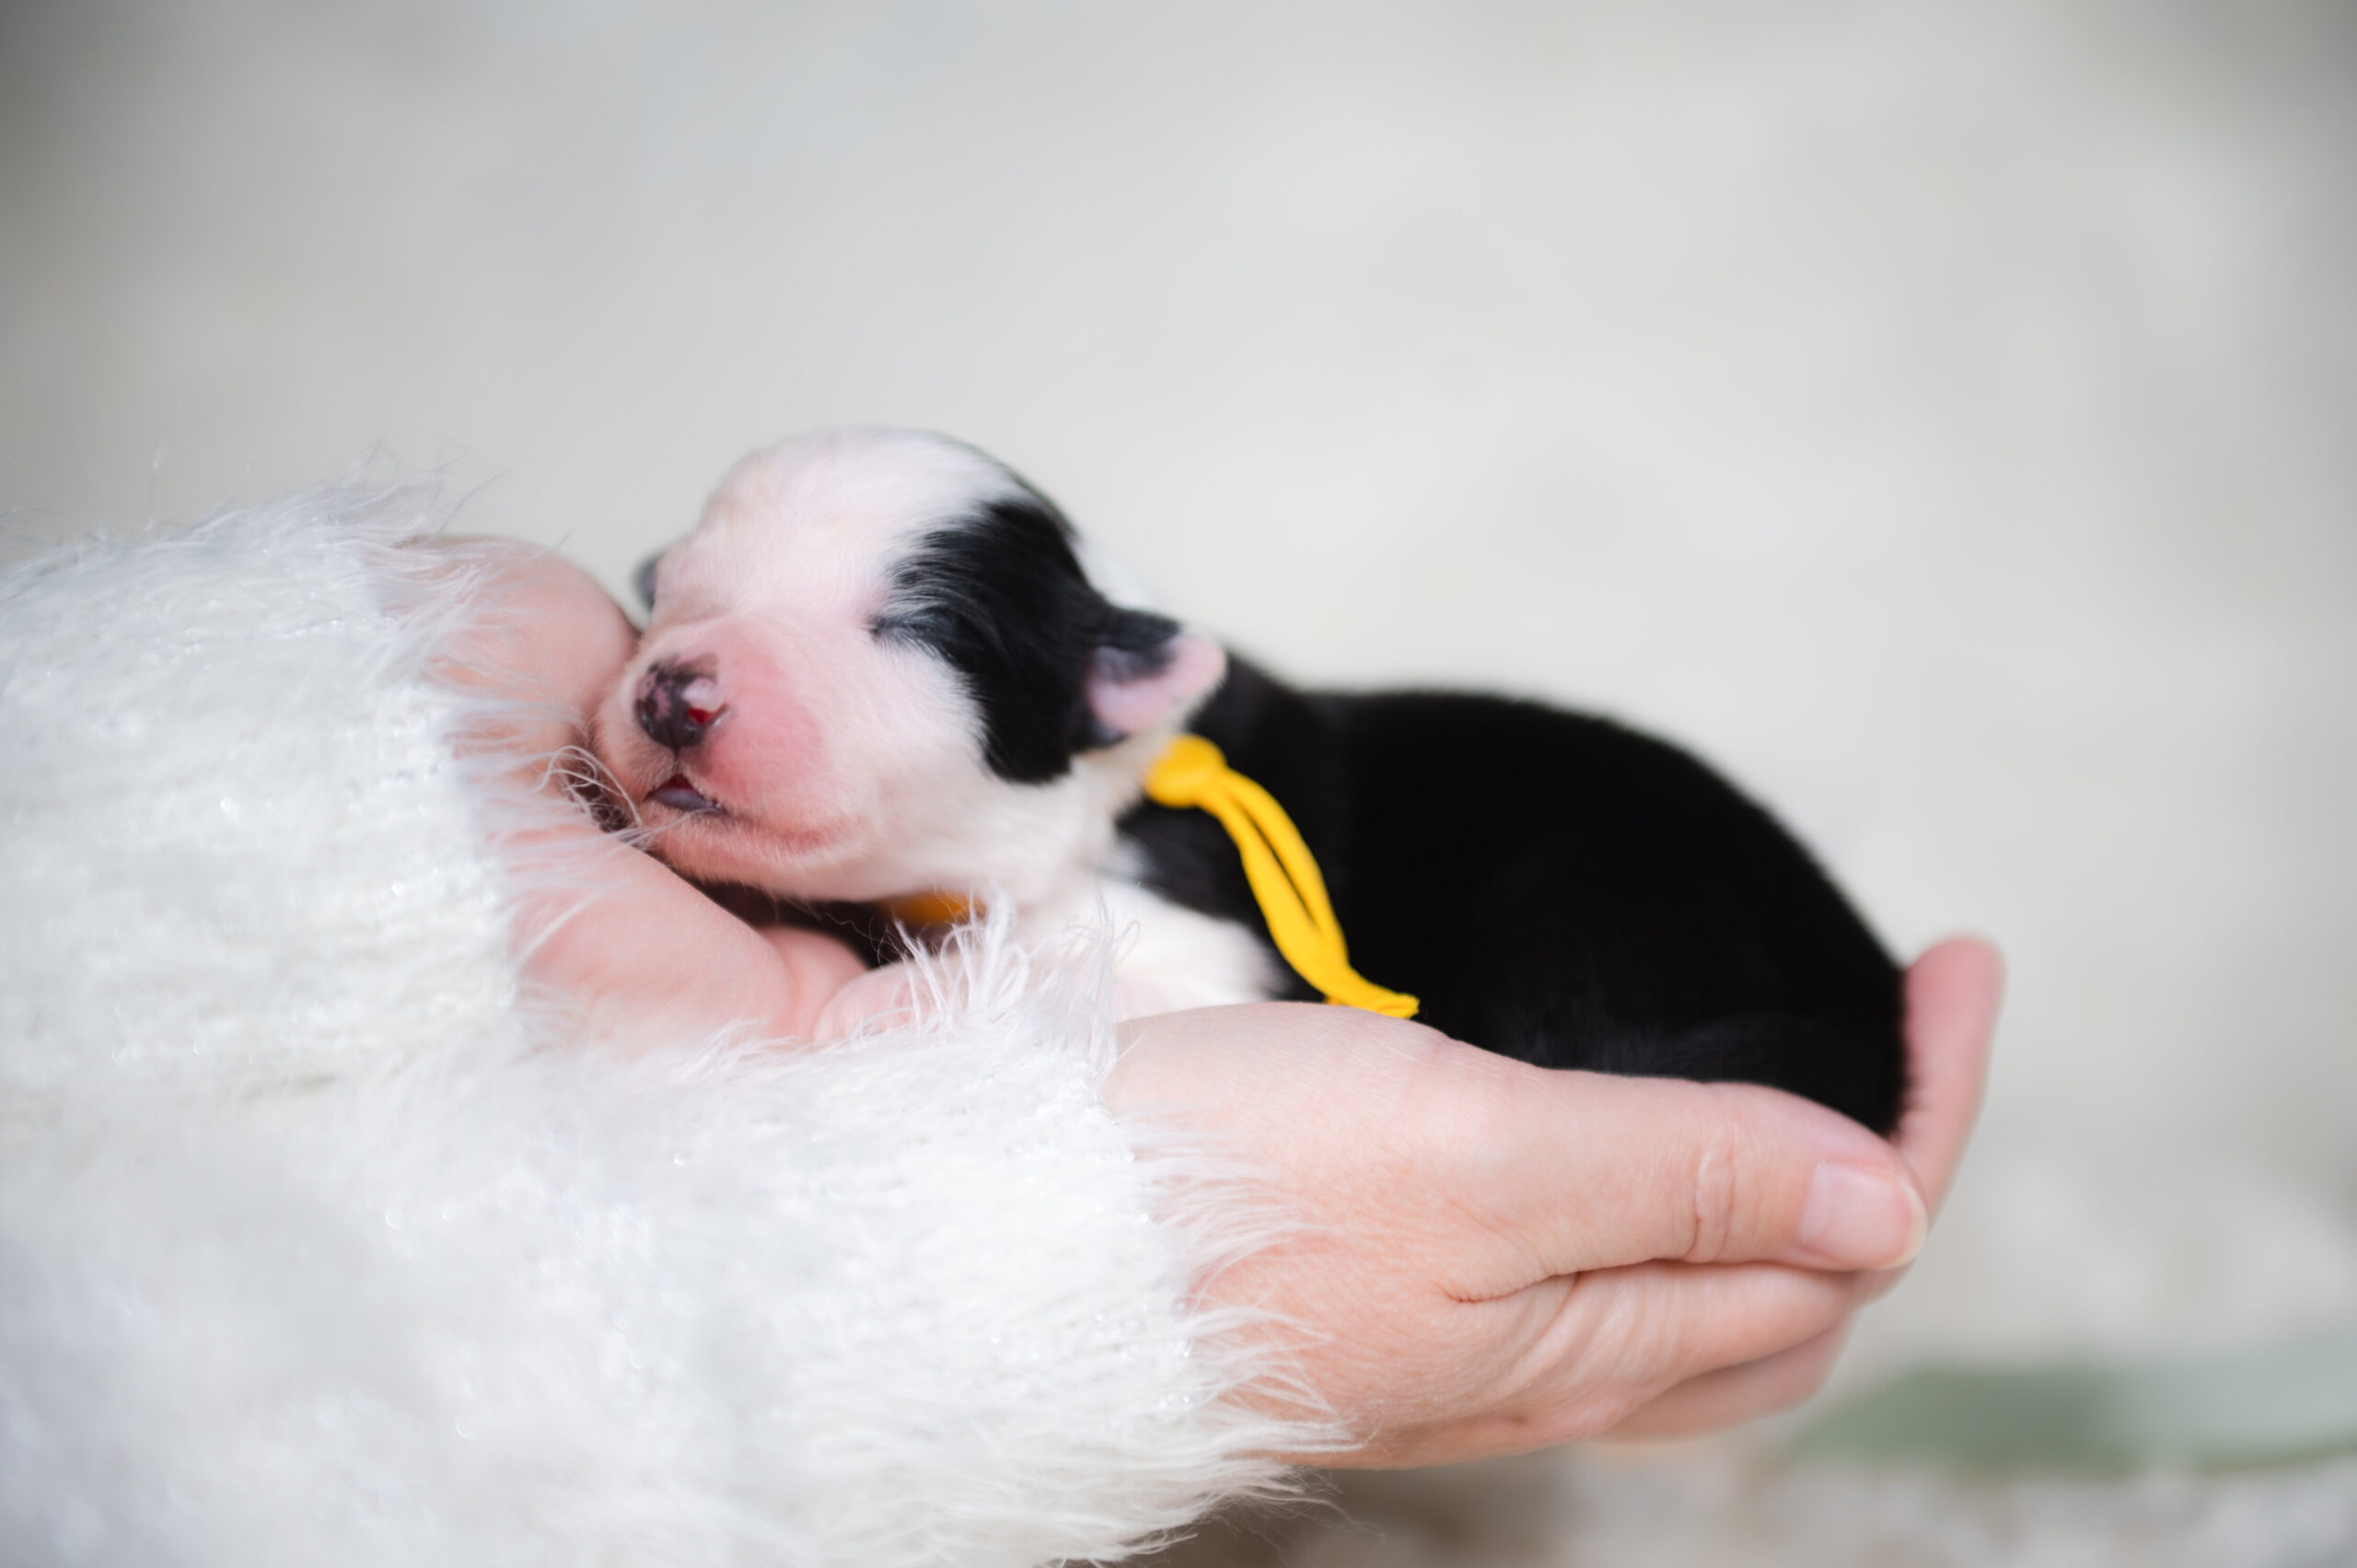 Black and white Border Collie puppy for sale in Florida.